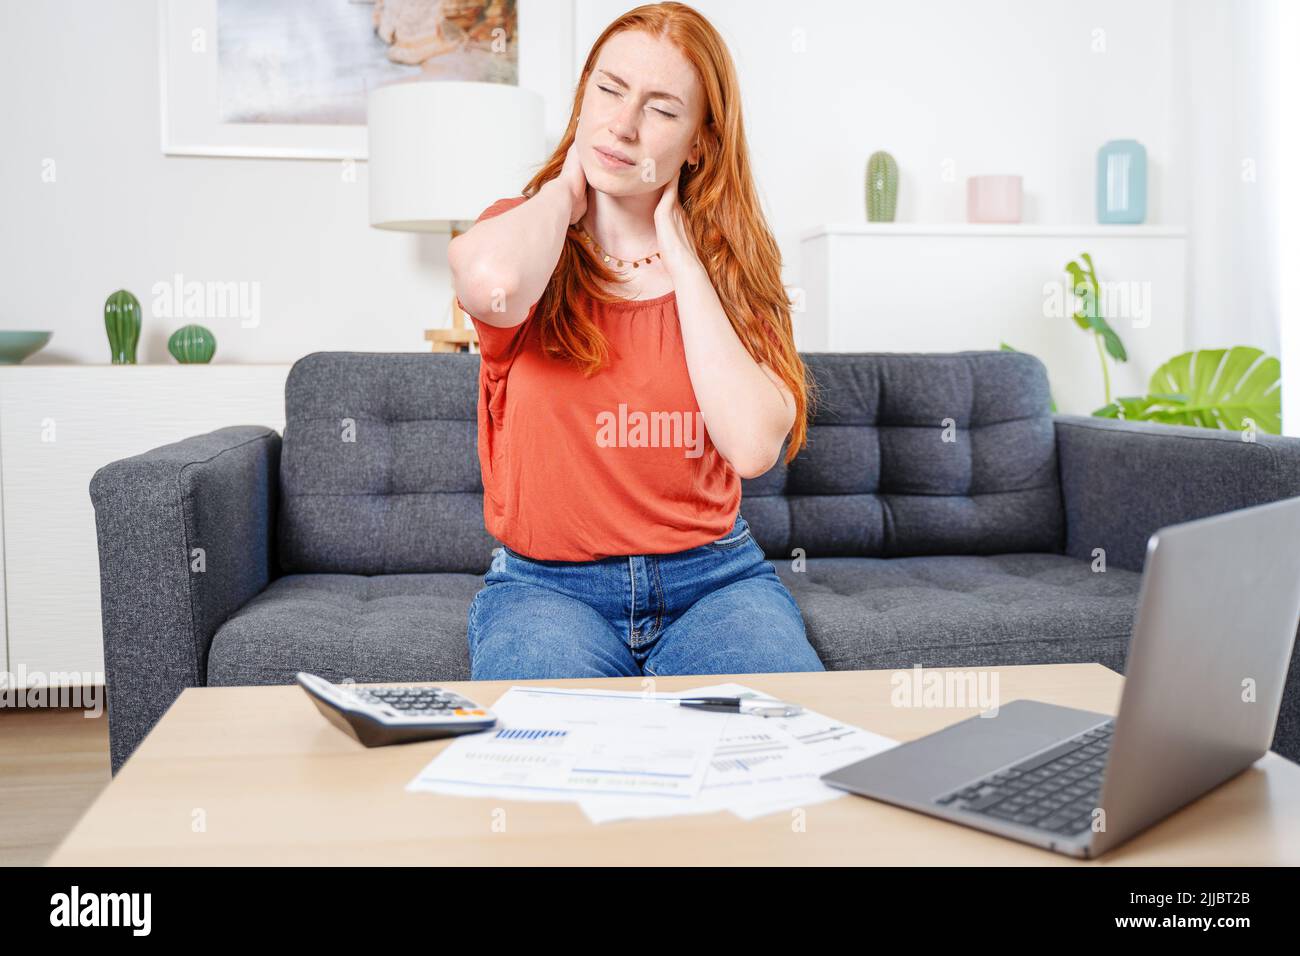 Woman suffering cervical pain with bad working posture Stock Photo